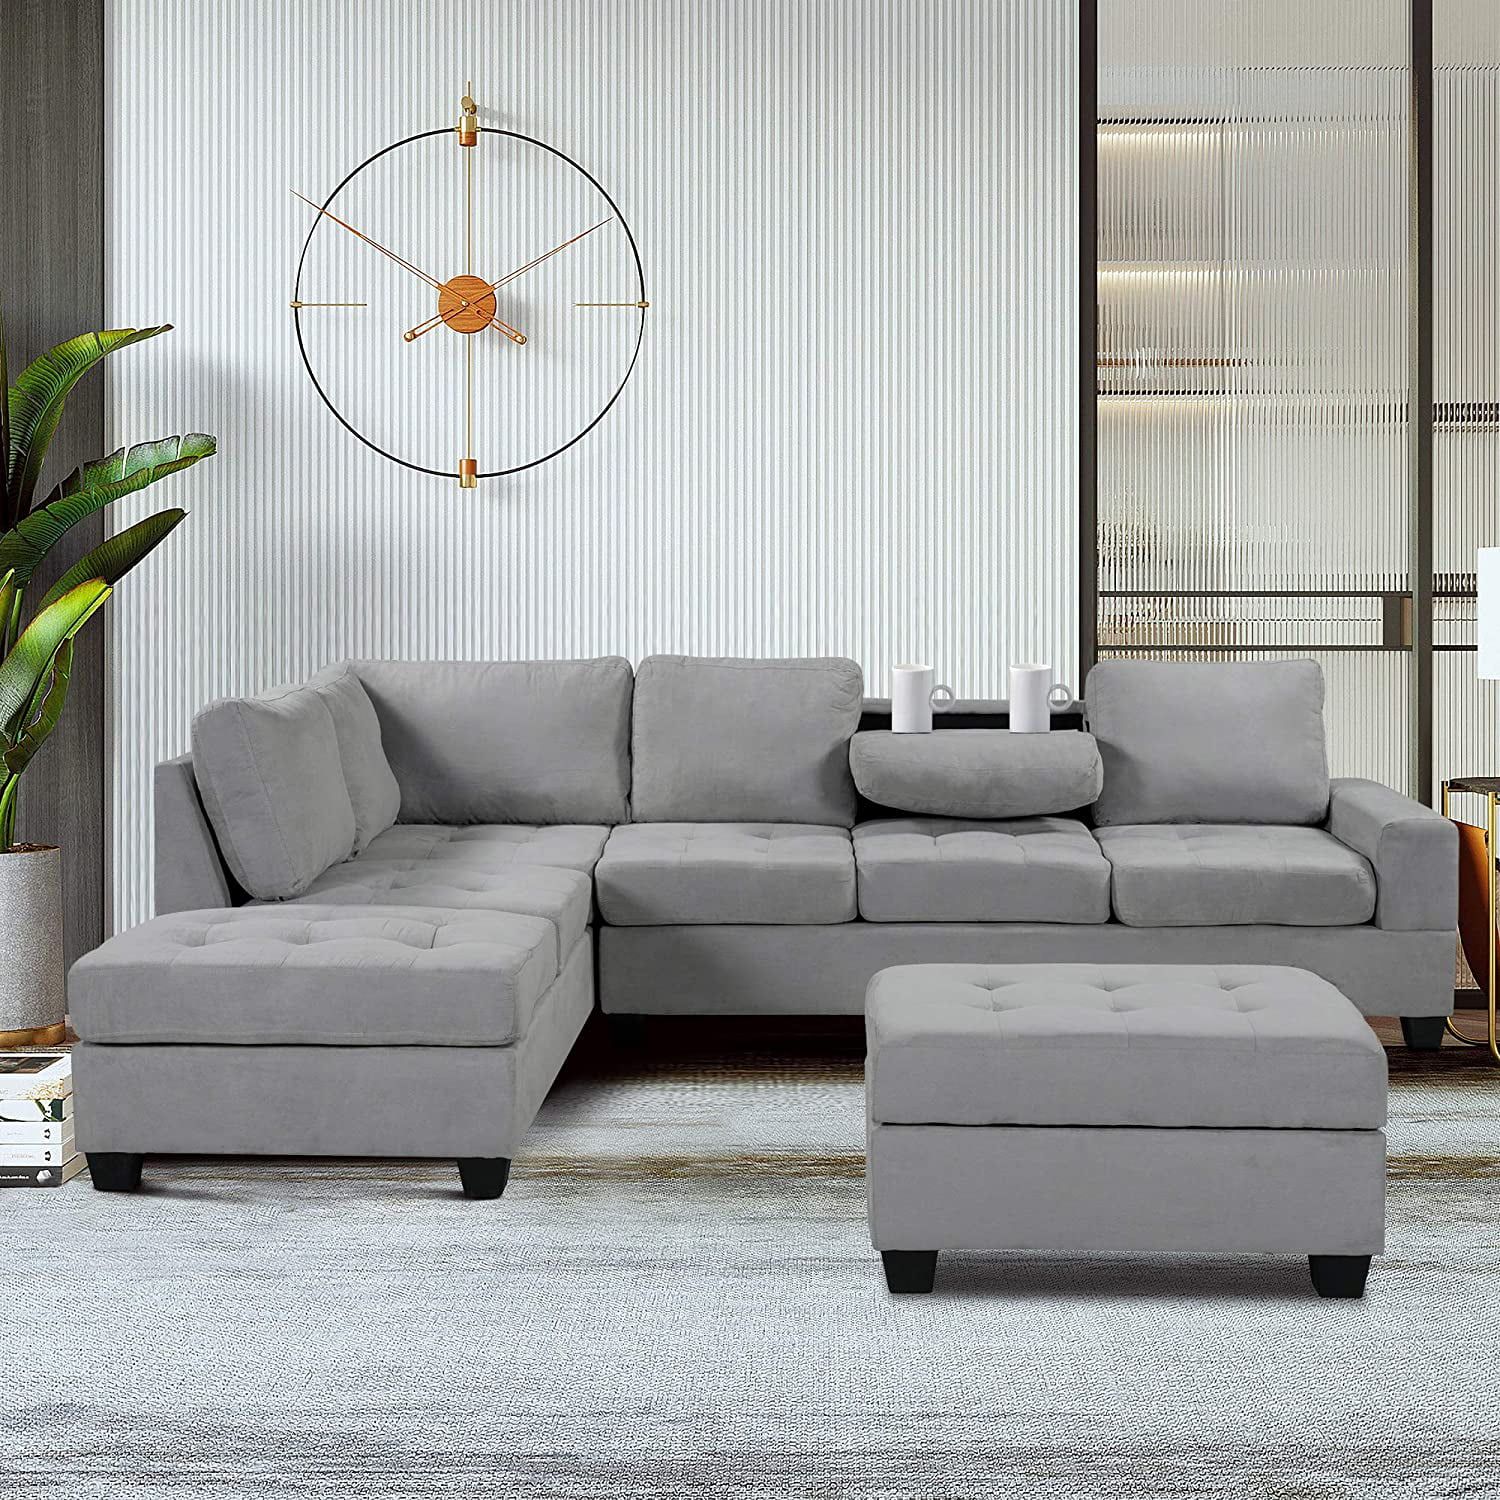 3 Piece Convertible Sectional Sofa L Shaped Couch With Reversible With Convertible L Shaped Sectional Sofas (Gallery 3 of 20)